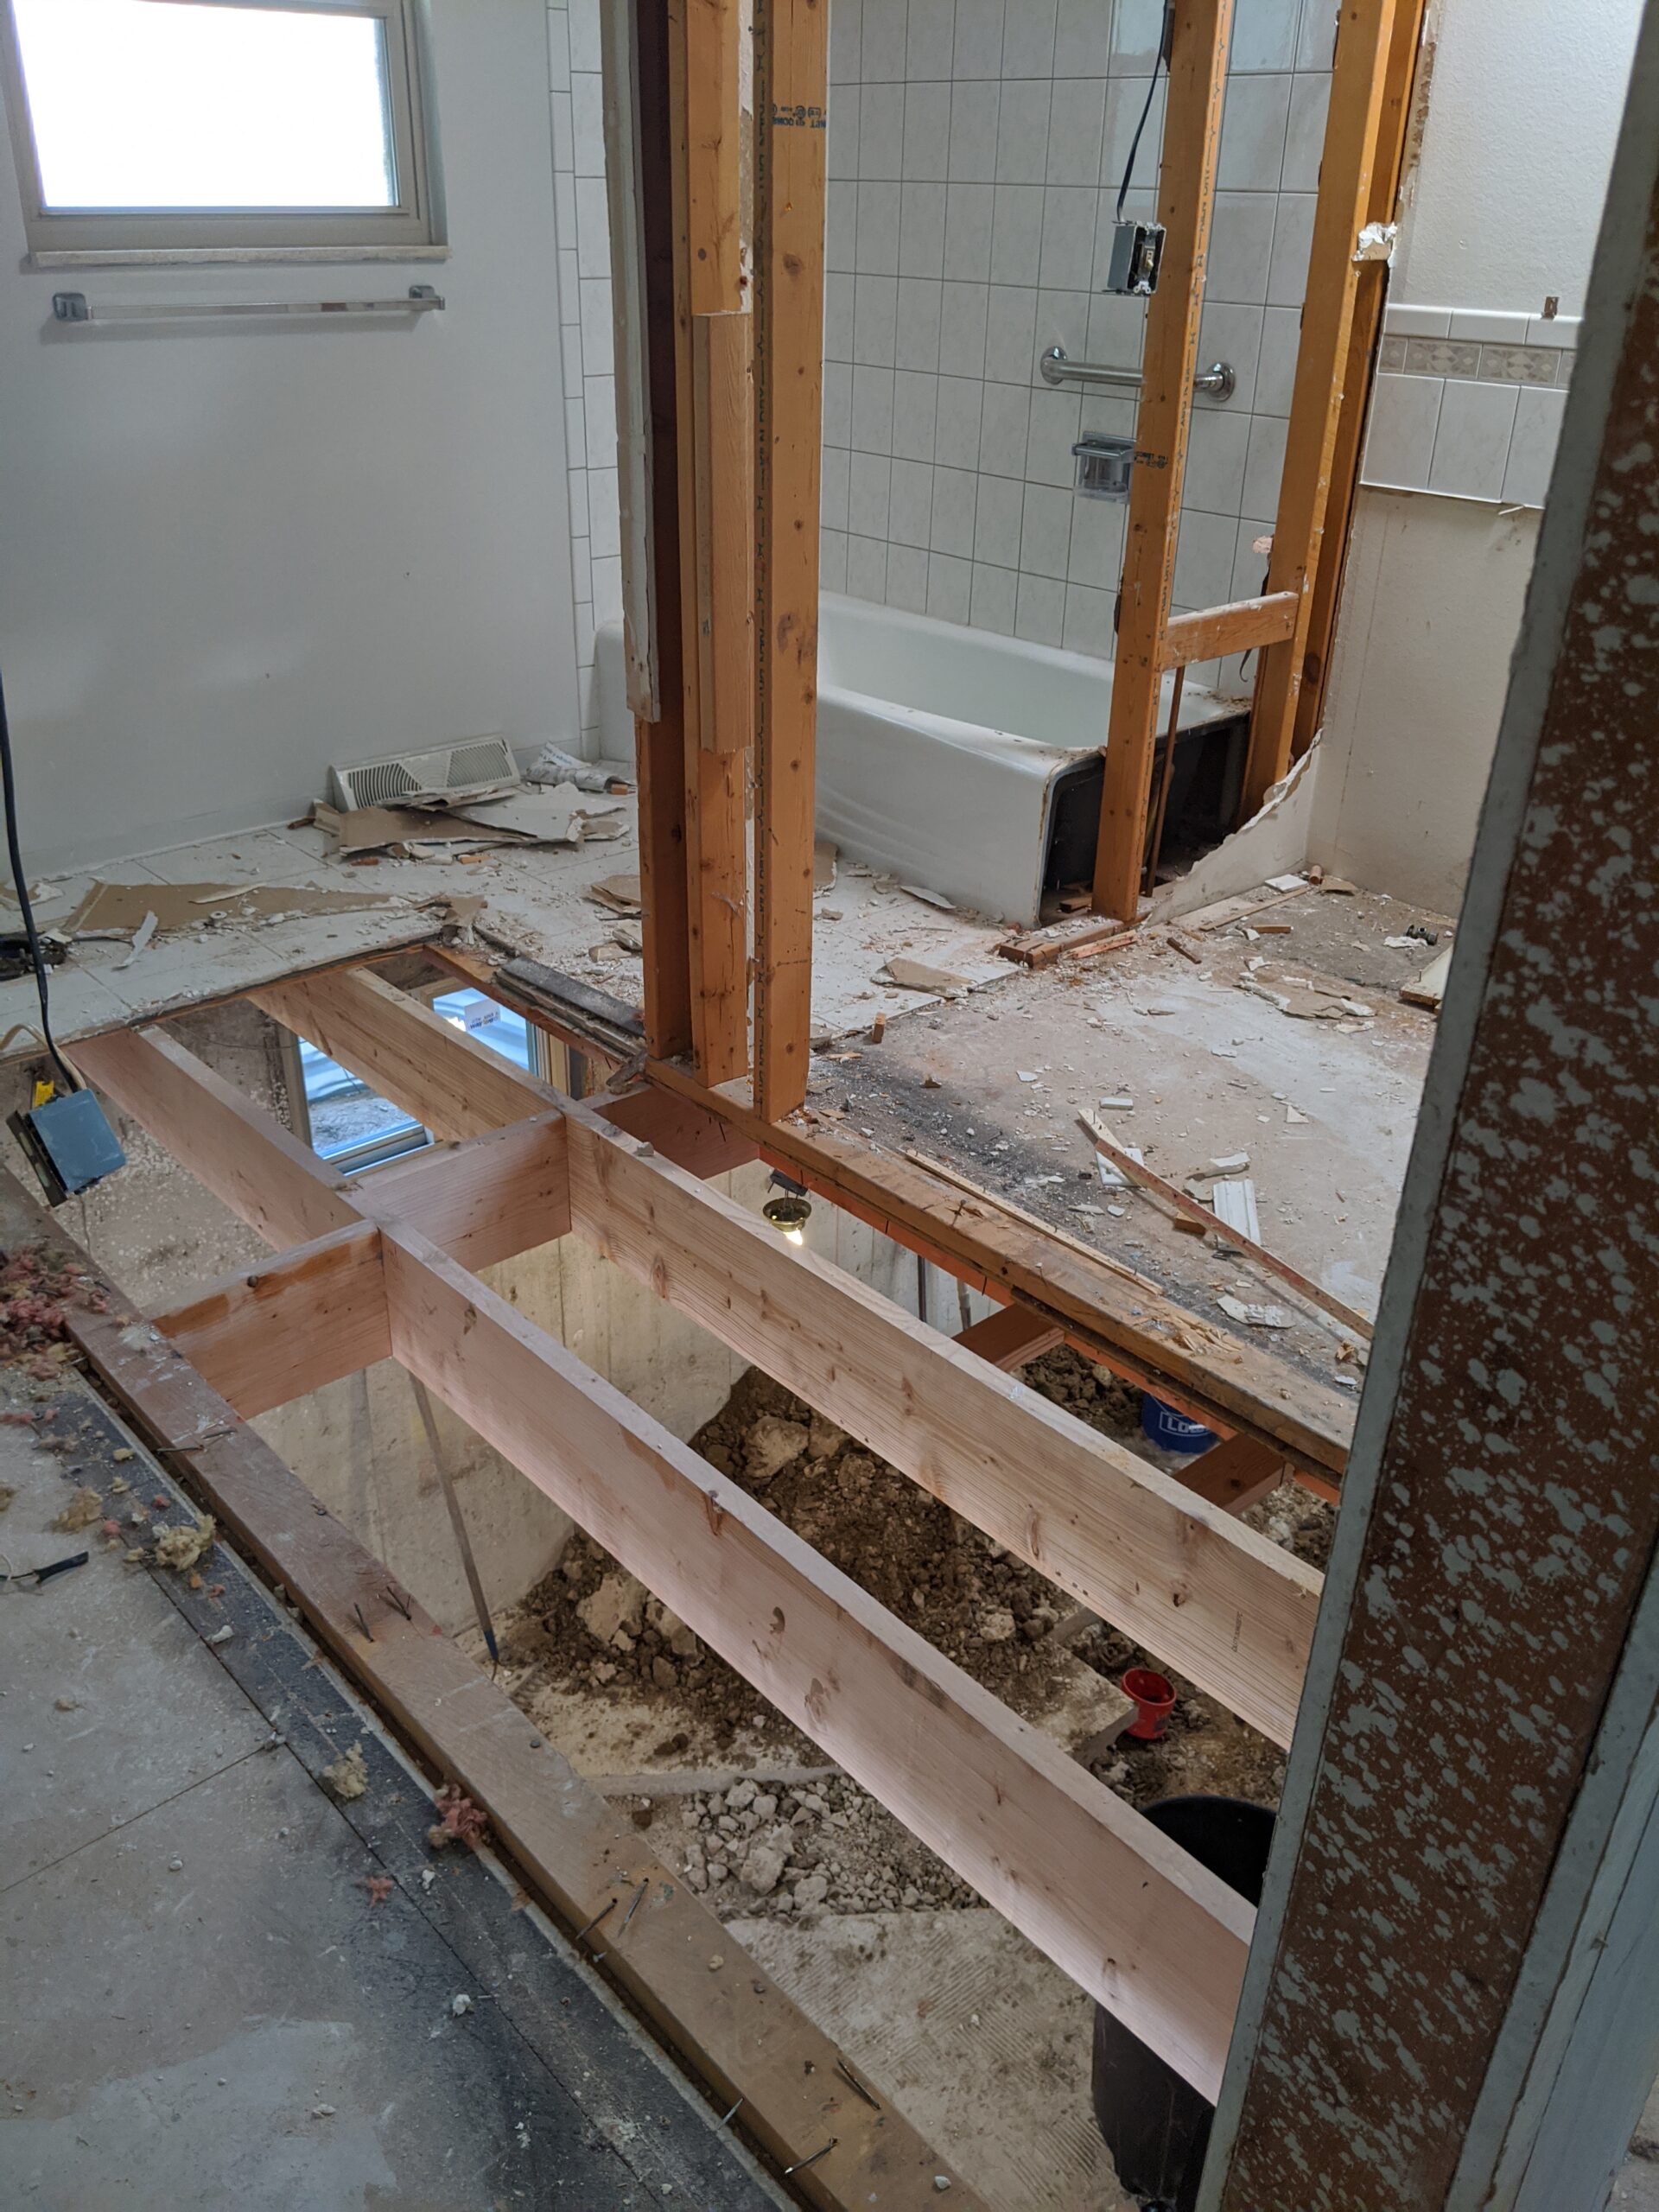 IN PROGRESS: Josh added floor joists beneath the hole in the stair’s original location to reinforce the subfloor in our future master bathroom.